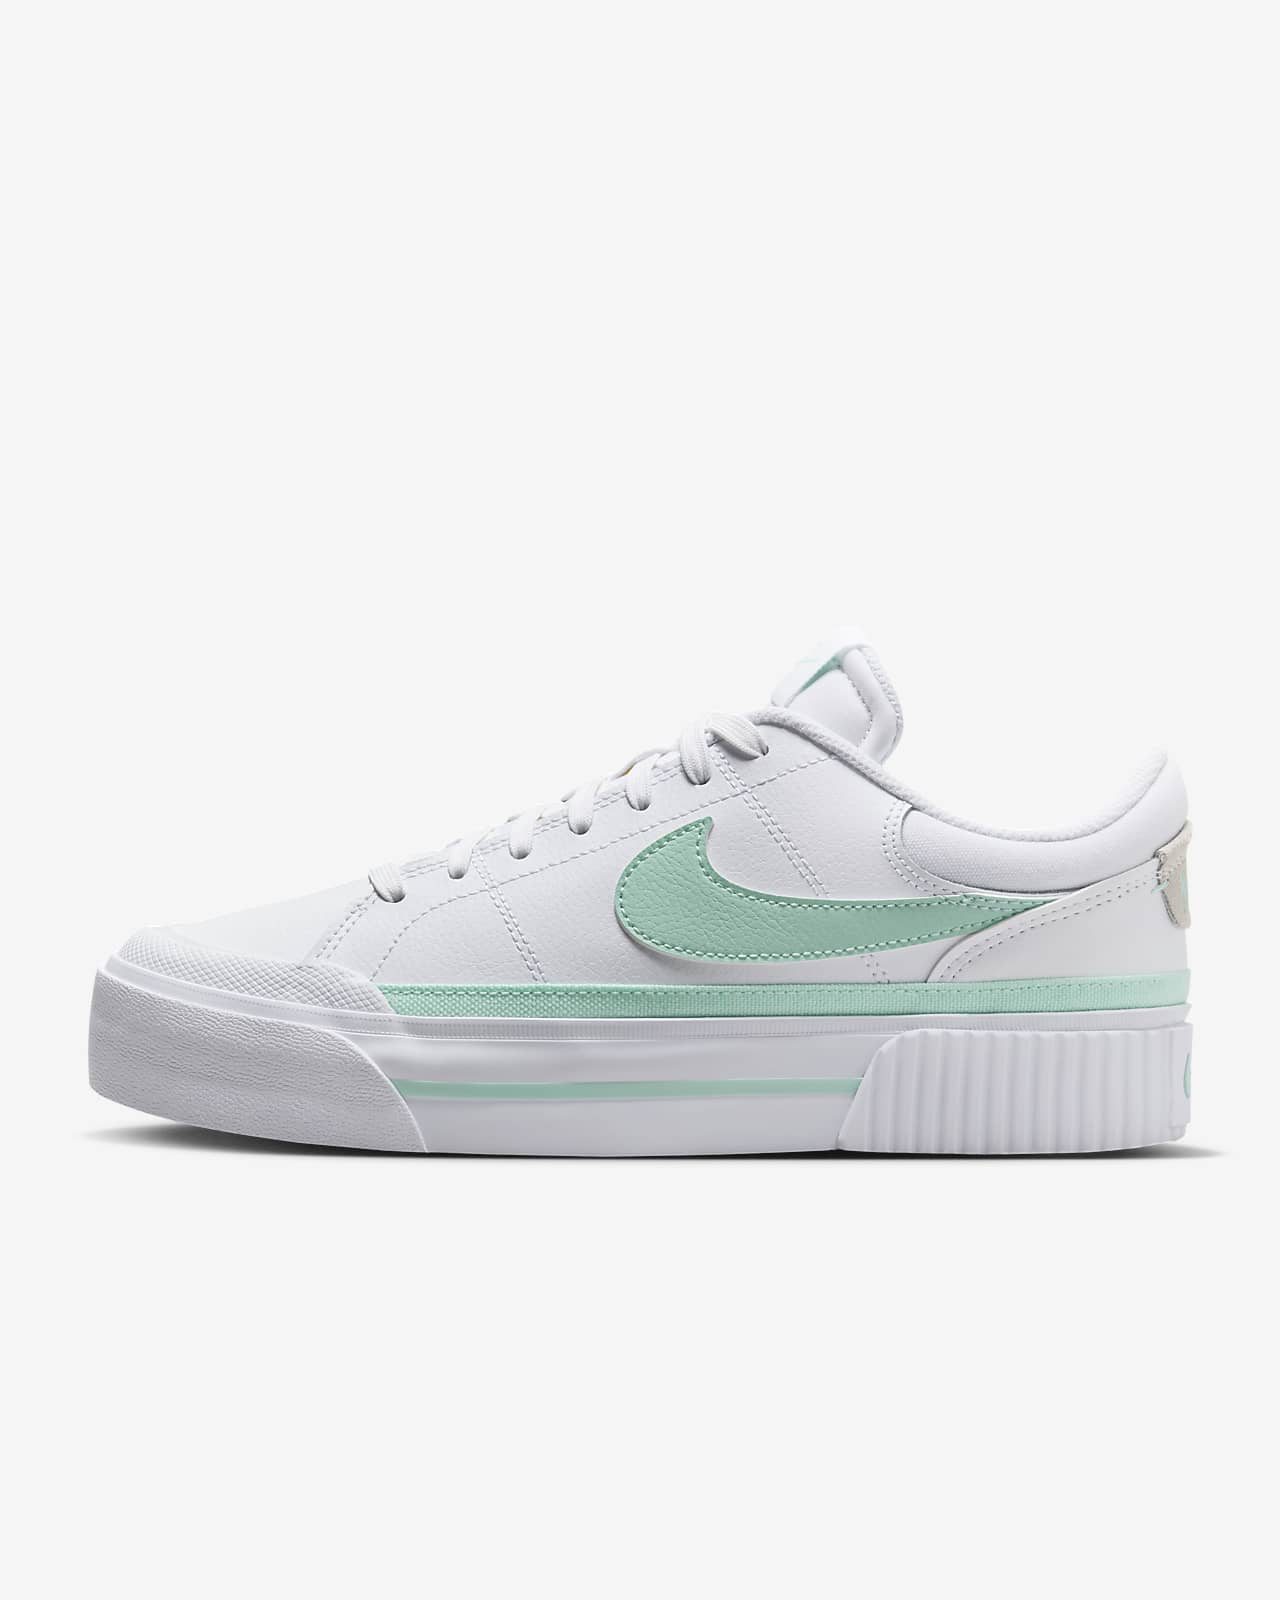 Chaussures Nike Court Legacy Lift pour femme